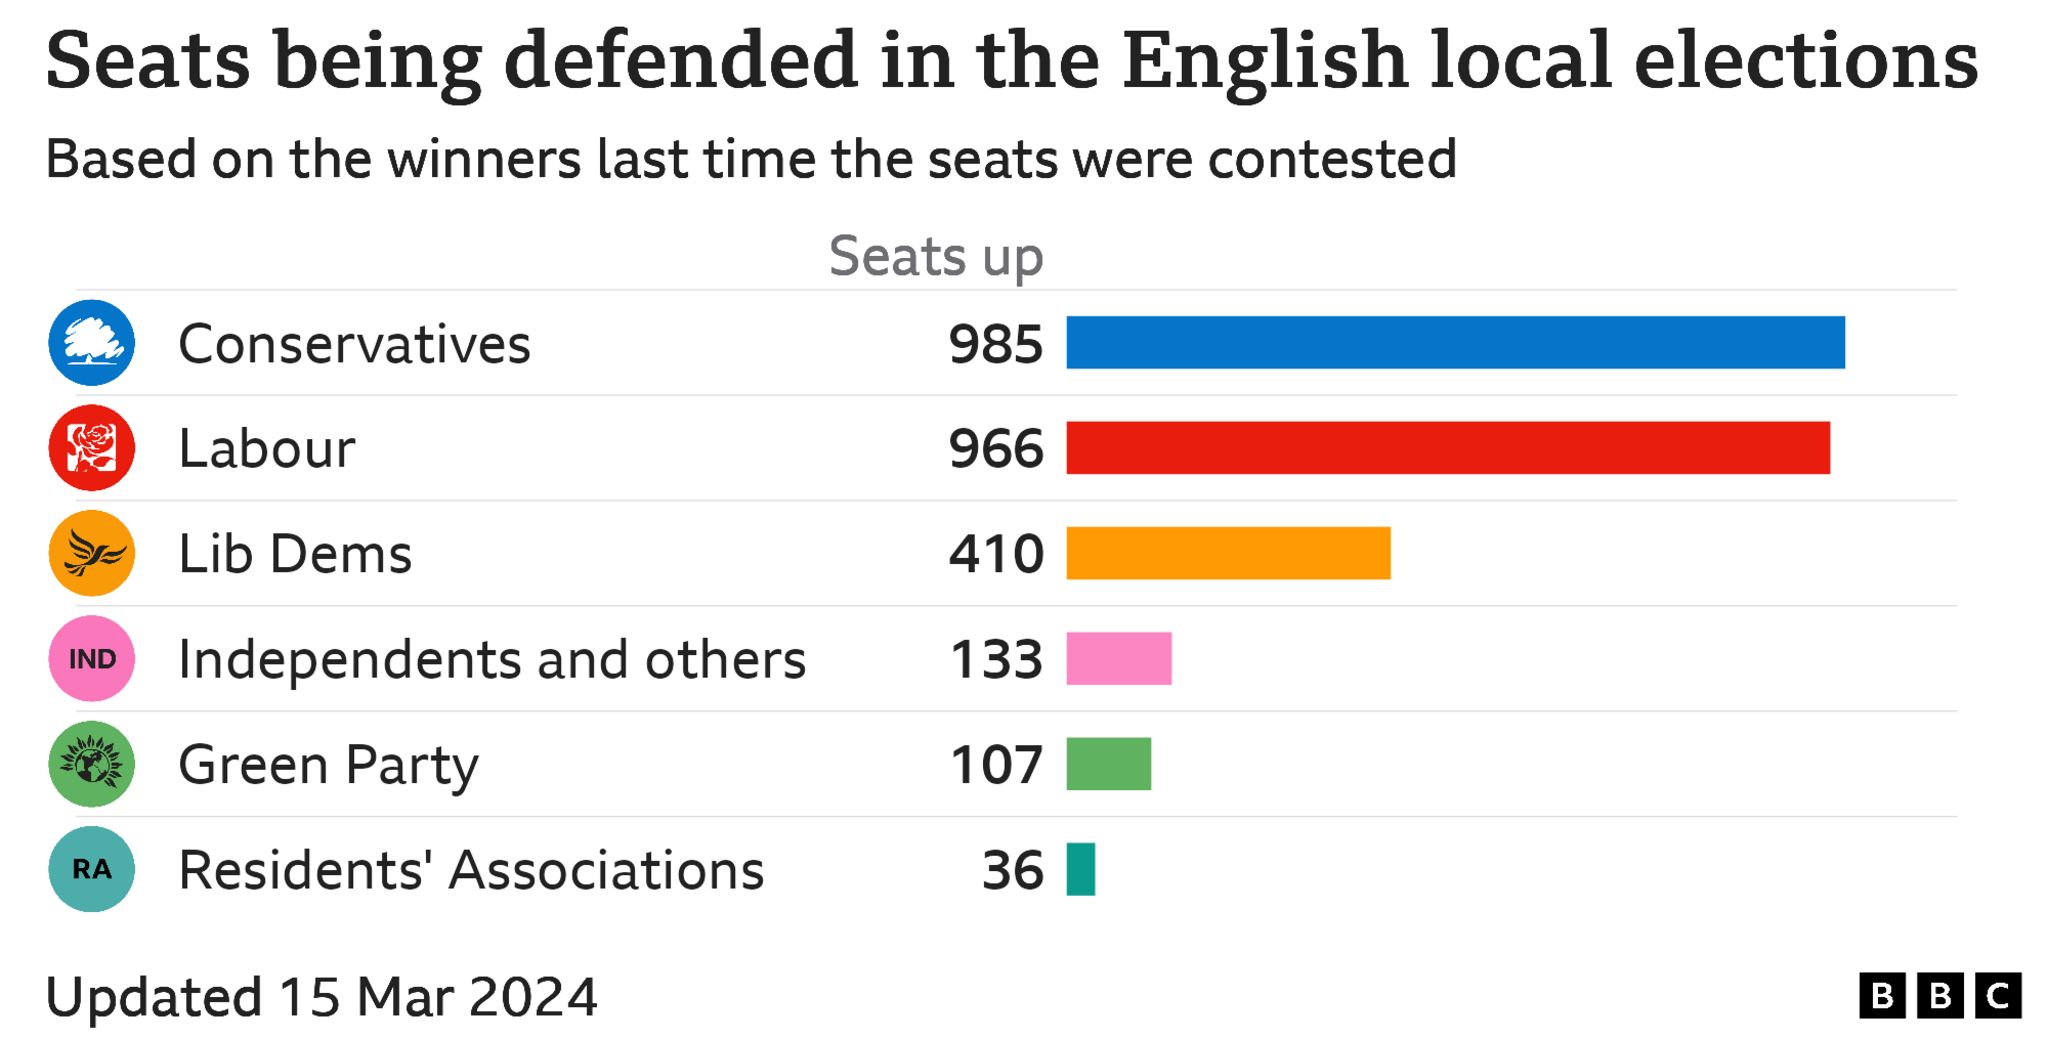 Bar chart showing the council seats defended by each party in England: Conservatives 985, Labor 966, Liberal Democrats 410, Independents and Others 133, Green Party 107, Residents' Associations 36